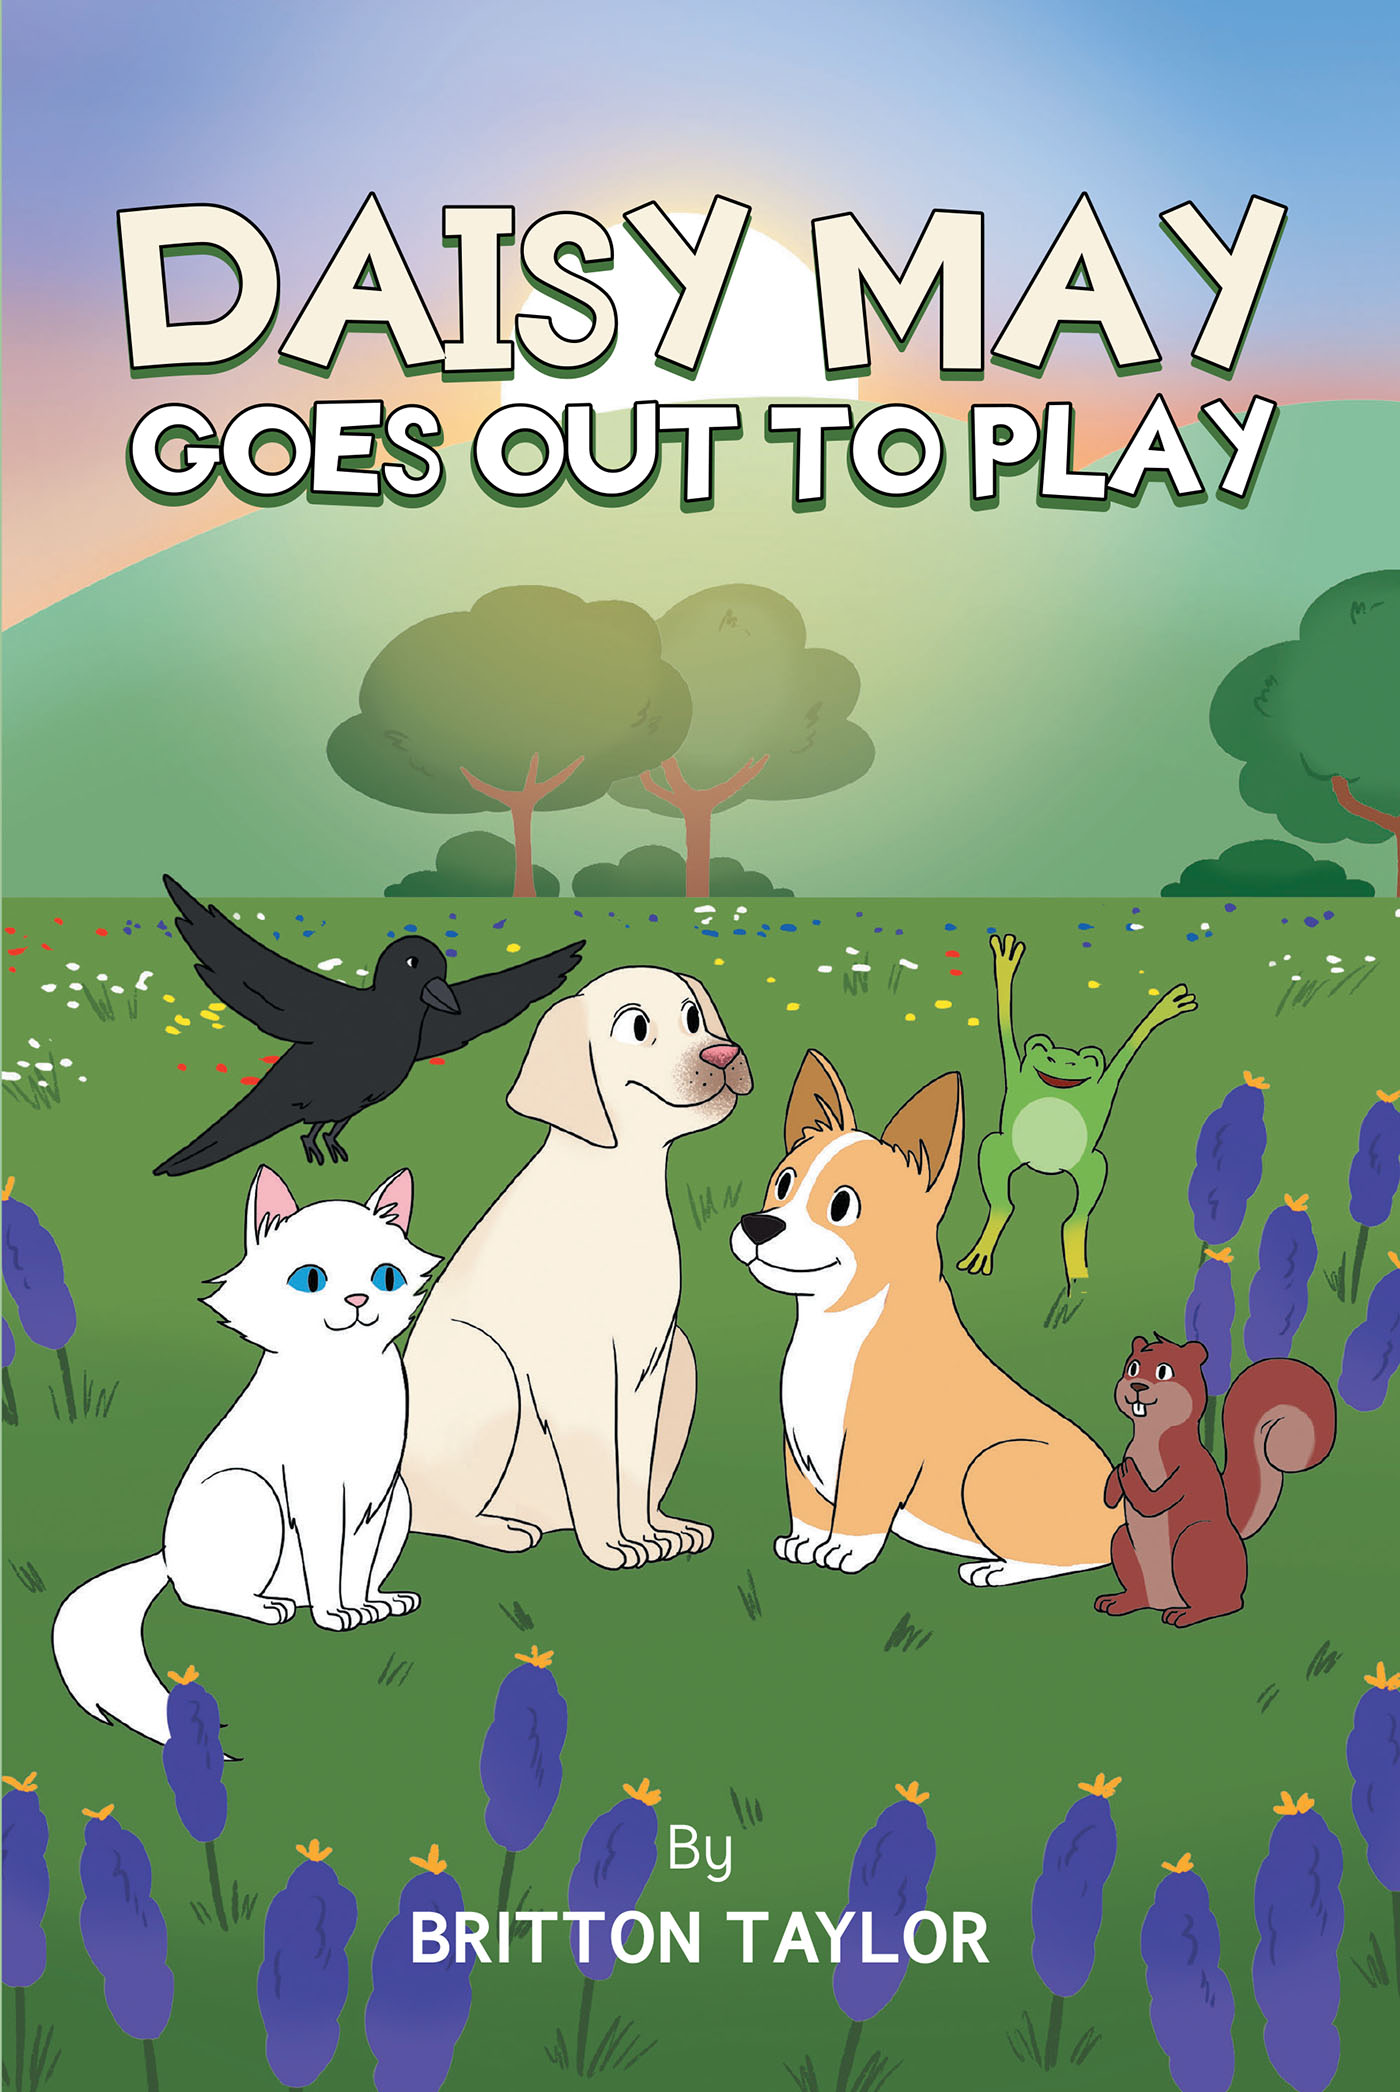 Author Britton Taylor’s New Book, “Daisy May Goes Out to Play,” is a Captivating Children’s Story That Celebrates the Importance of Friendship